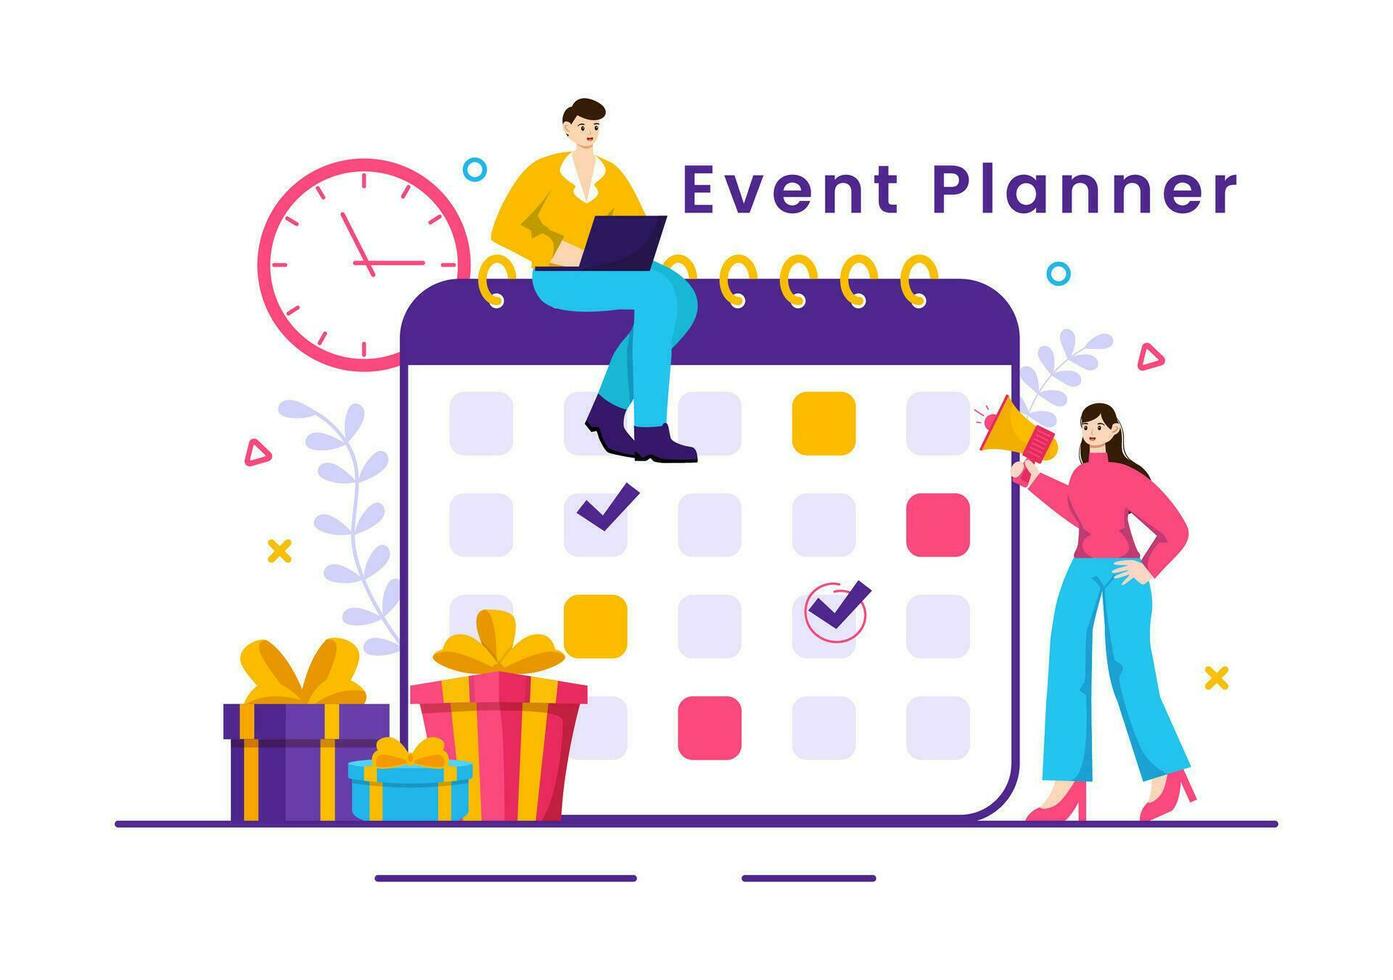 Event Planner Vector Illustration with Planning Schedule, Time Management, Business Agenda and Calendar Concept in Flat Cartoon Background